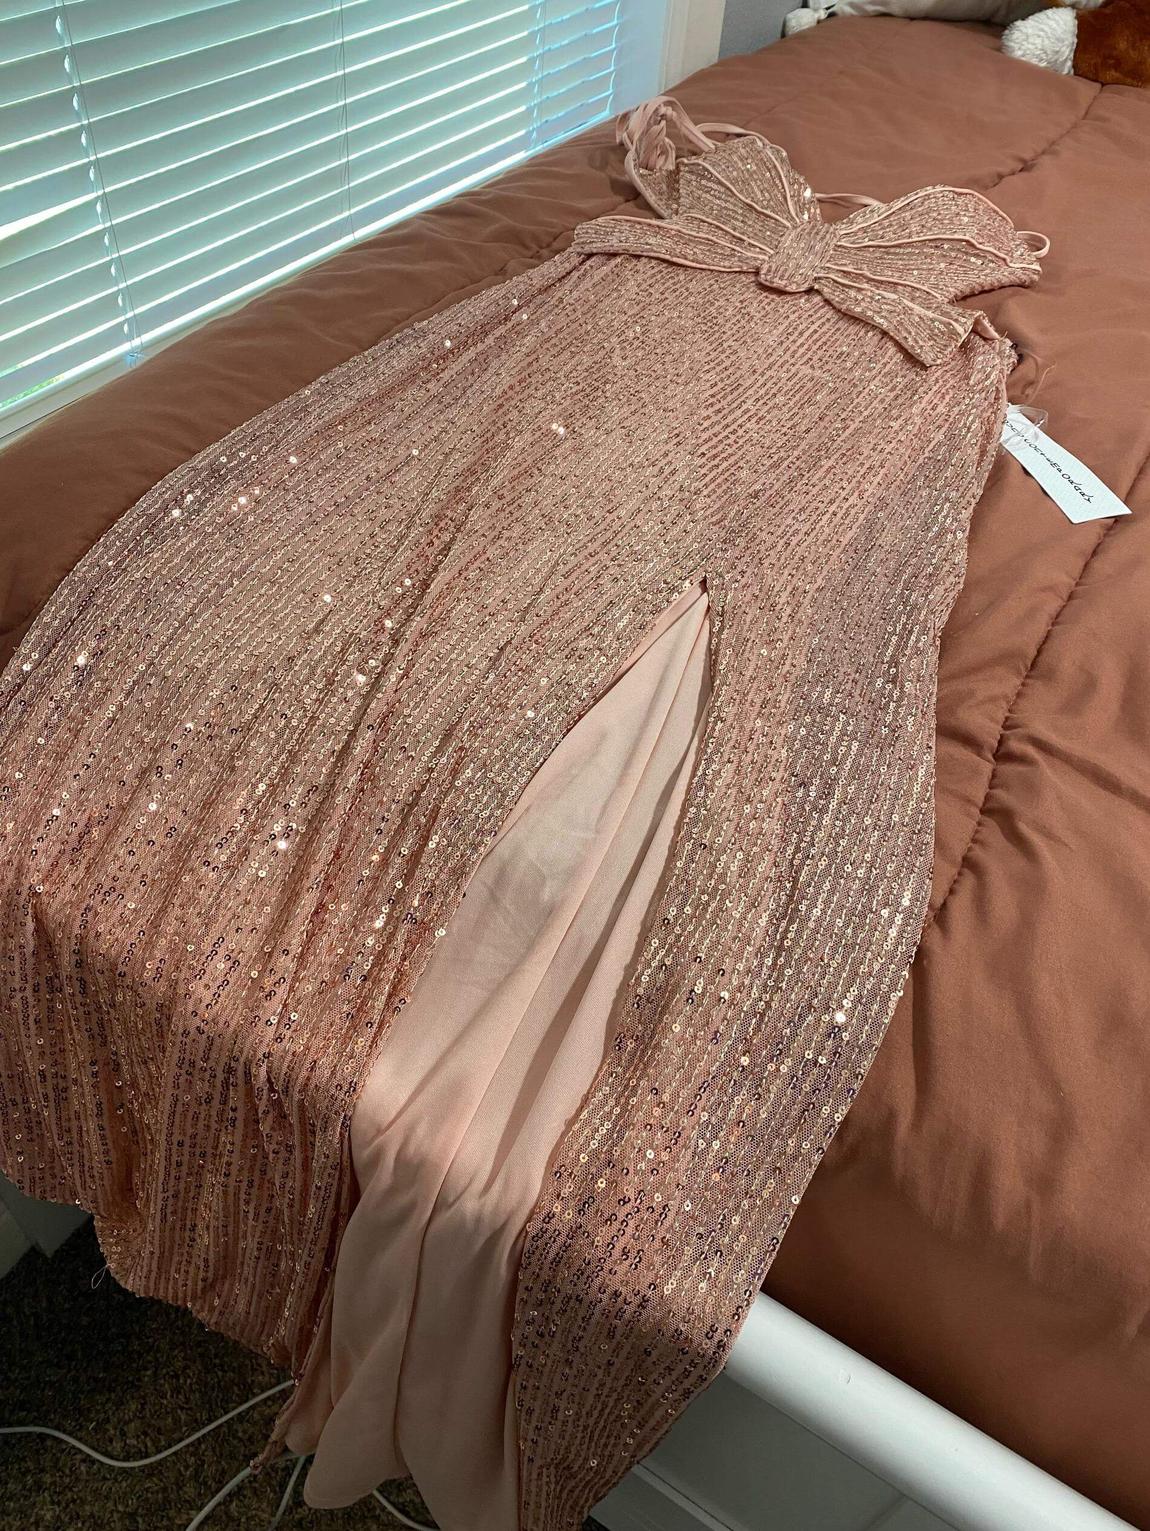 Size 8 Prom Sequined Light Pink Mermaid Dress on Queenly